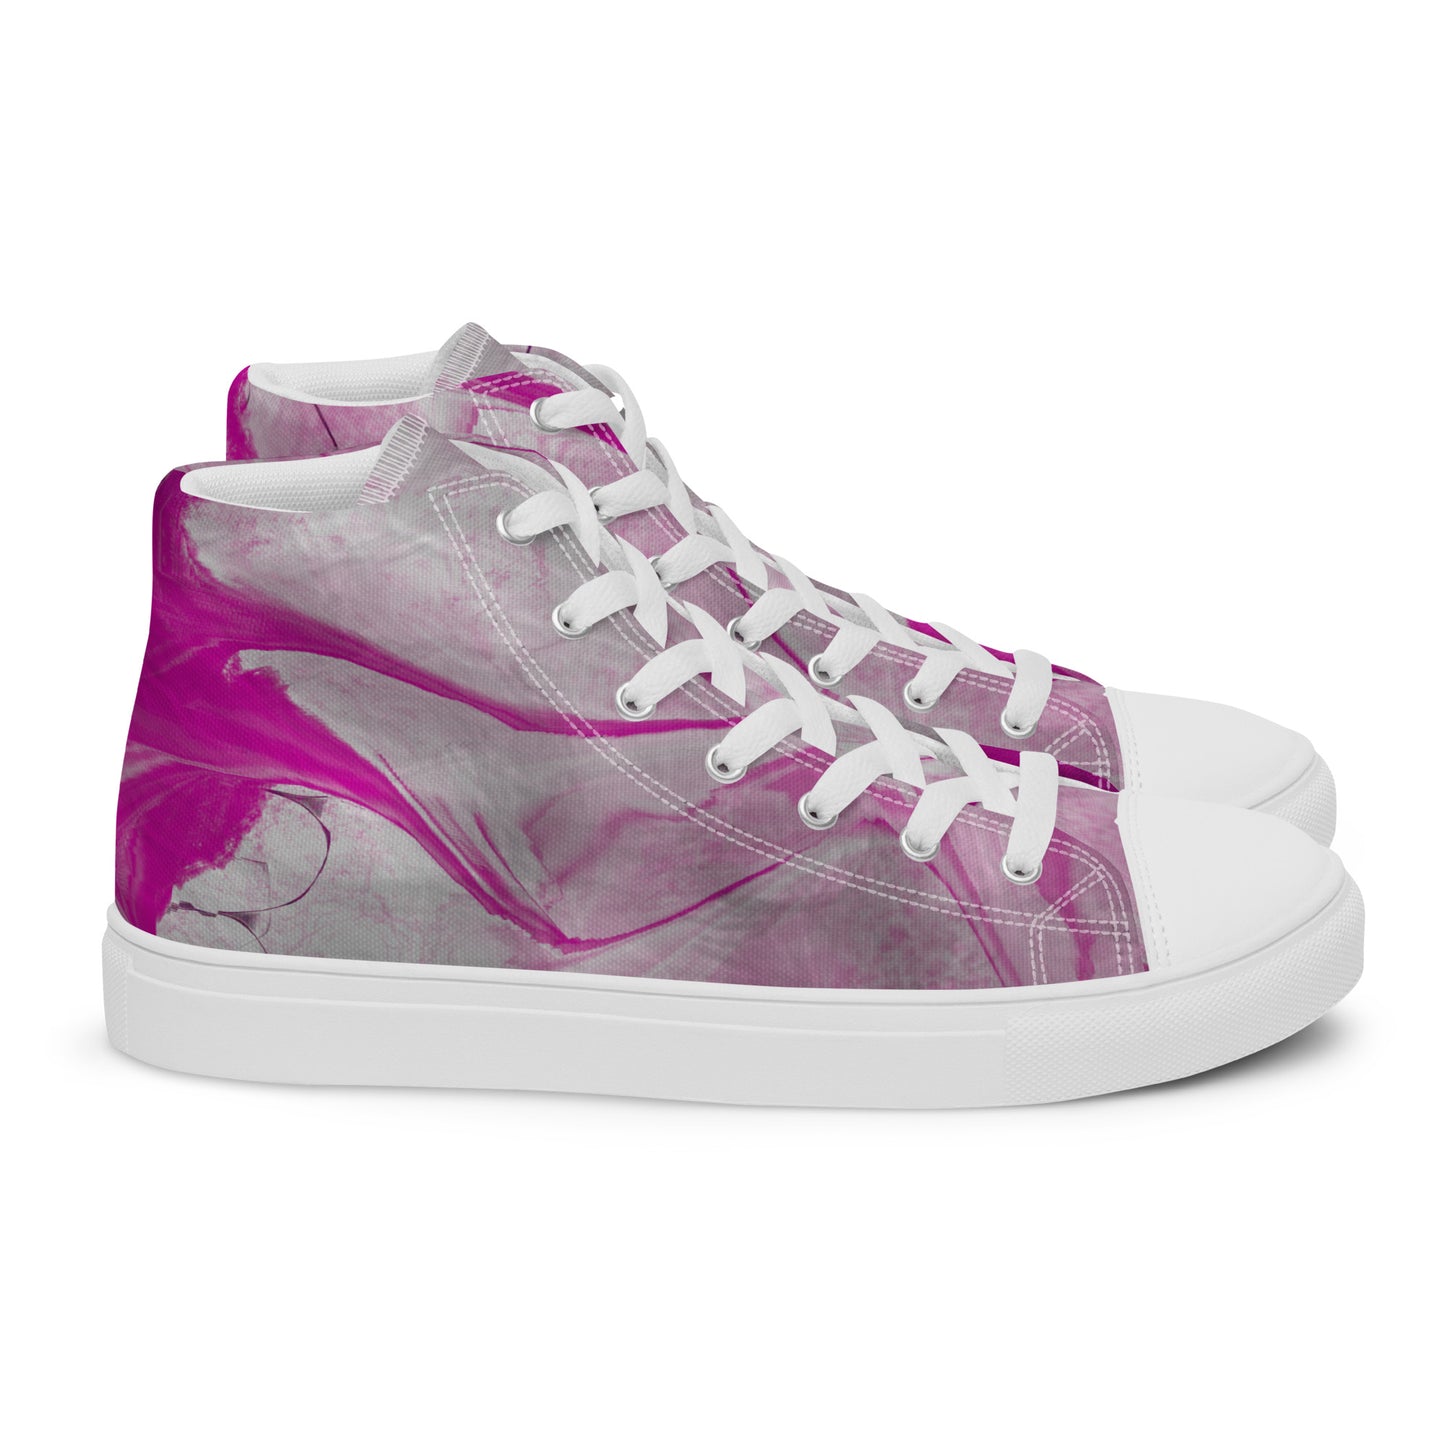 Muse high top canvas shoes